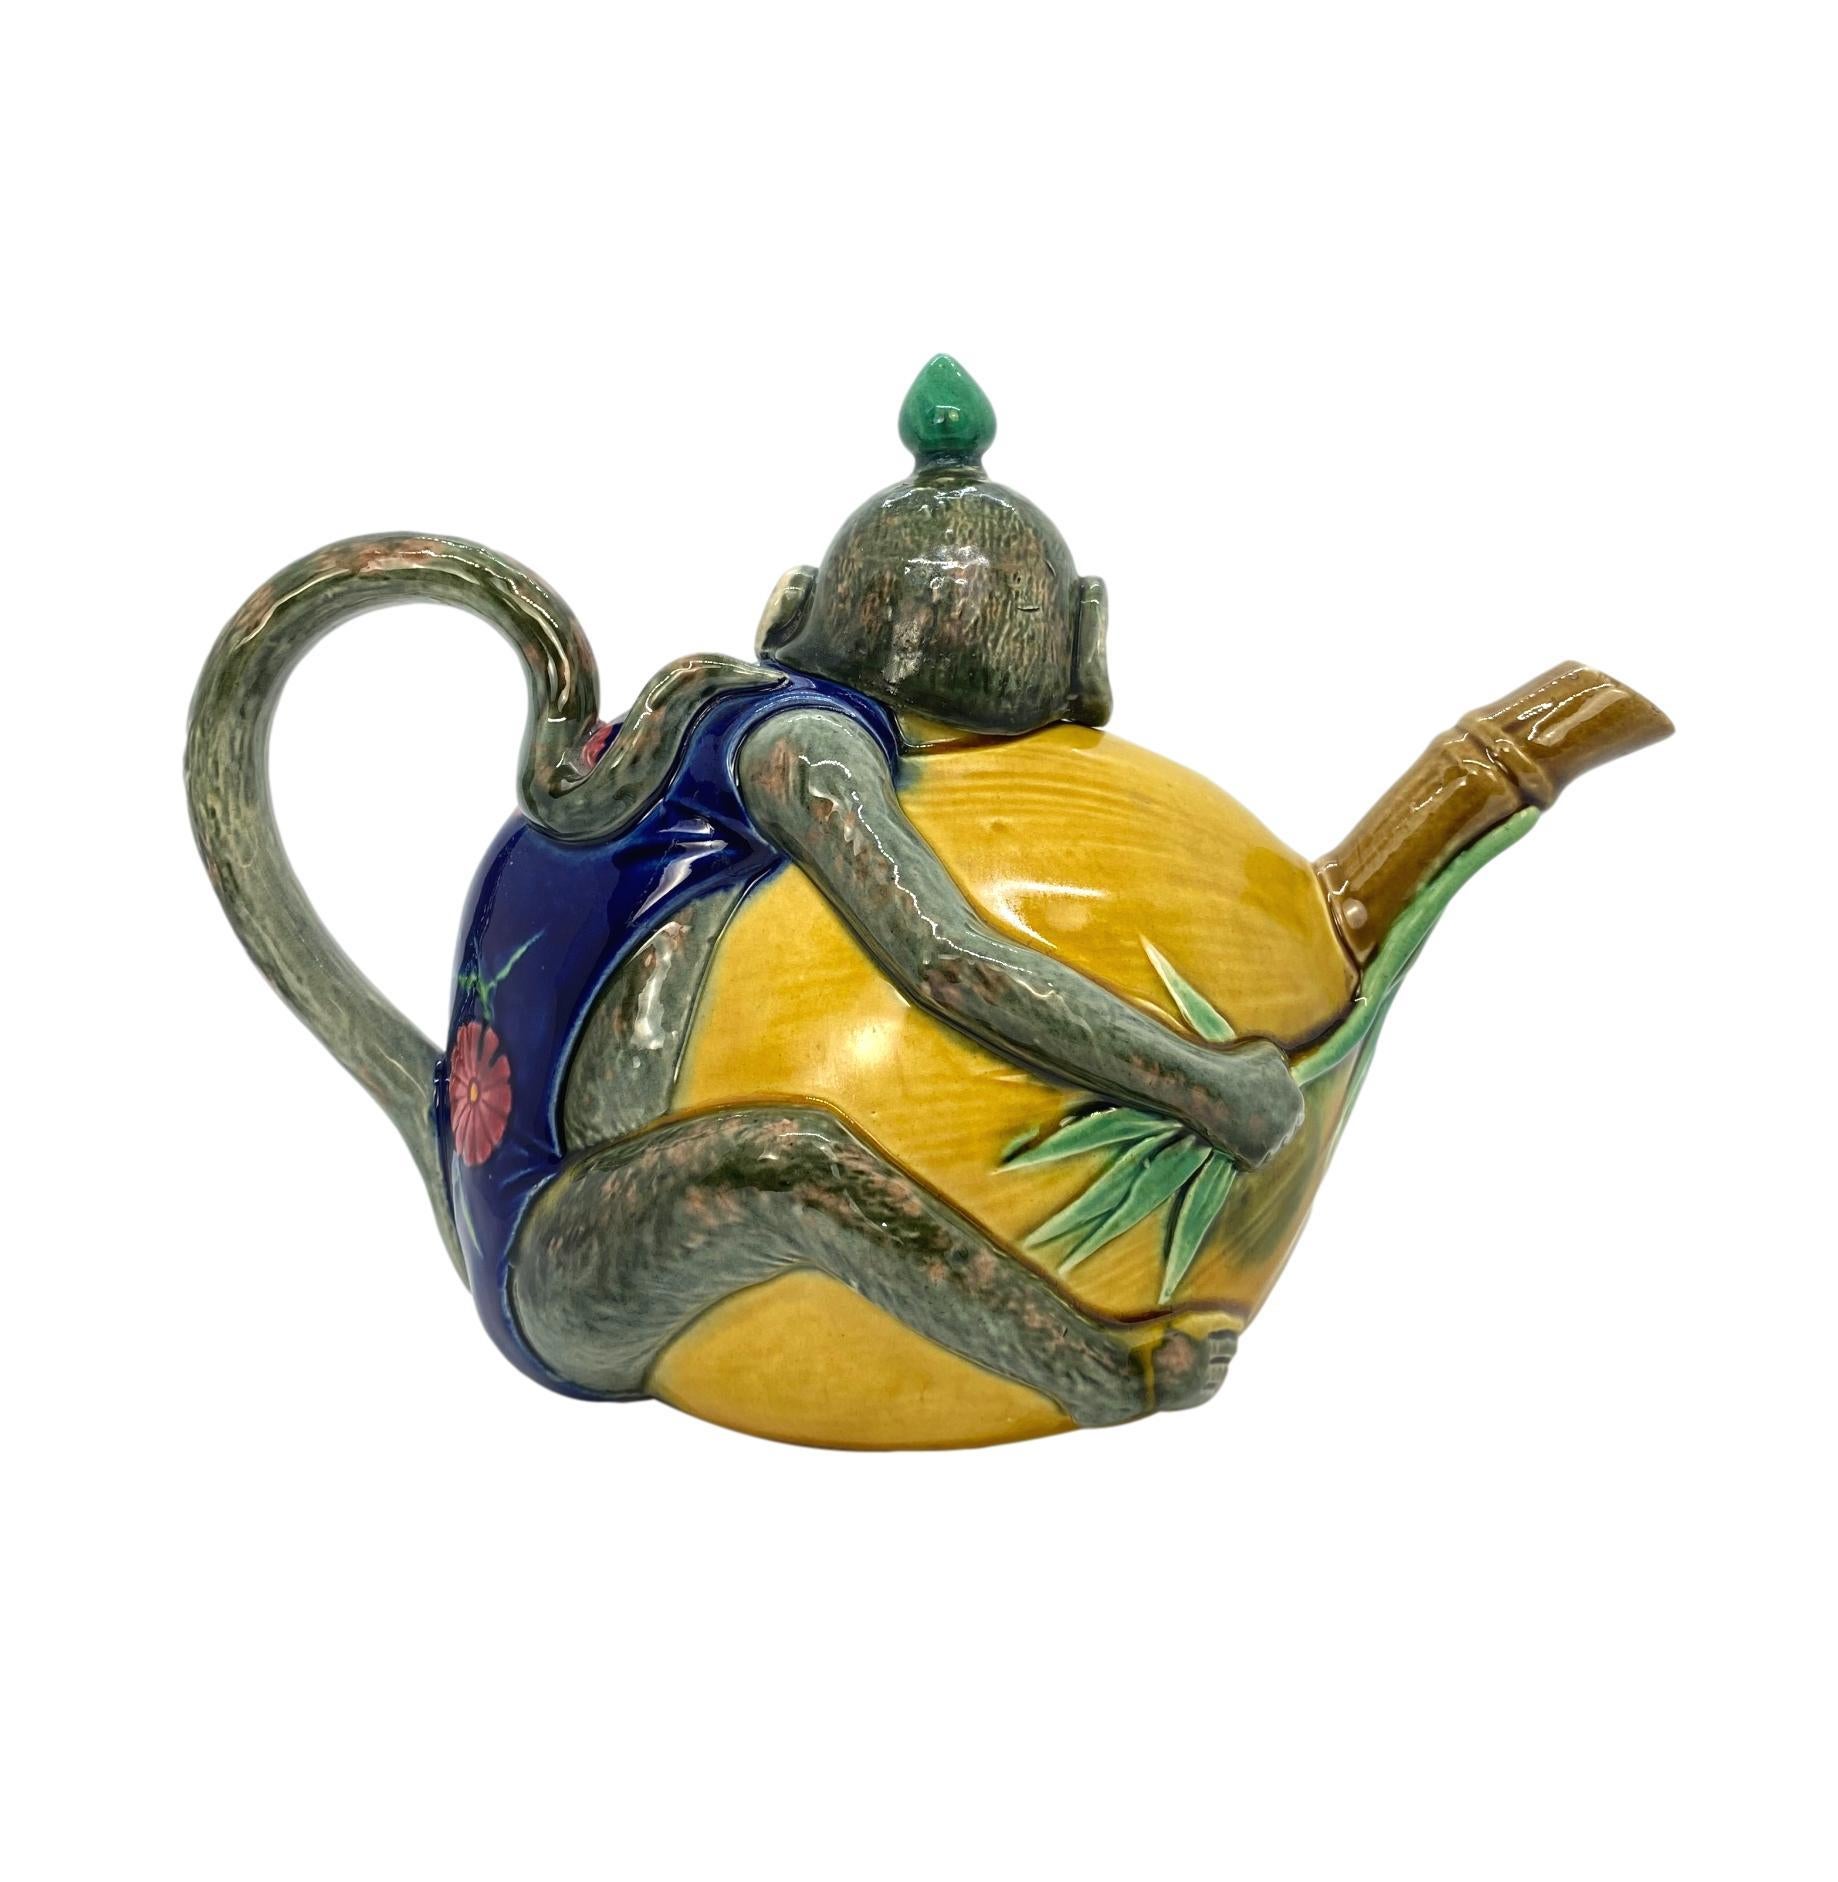 Minton Majolica teapot, beautifully and vibrantly glazed monkey with a coconut, dated 1874. This piece embodies all the hallmarks of the unrivaled best, Minton Majolica: the absolute highest quality, purist glazes--and particularly in this